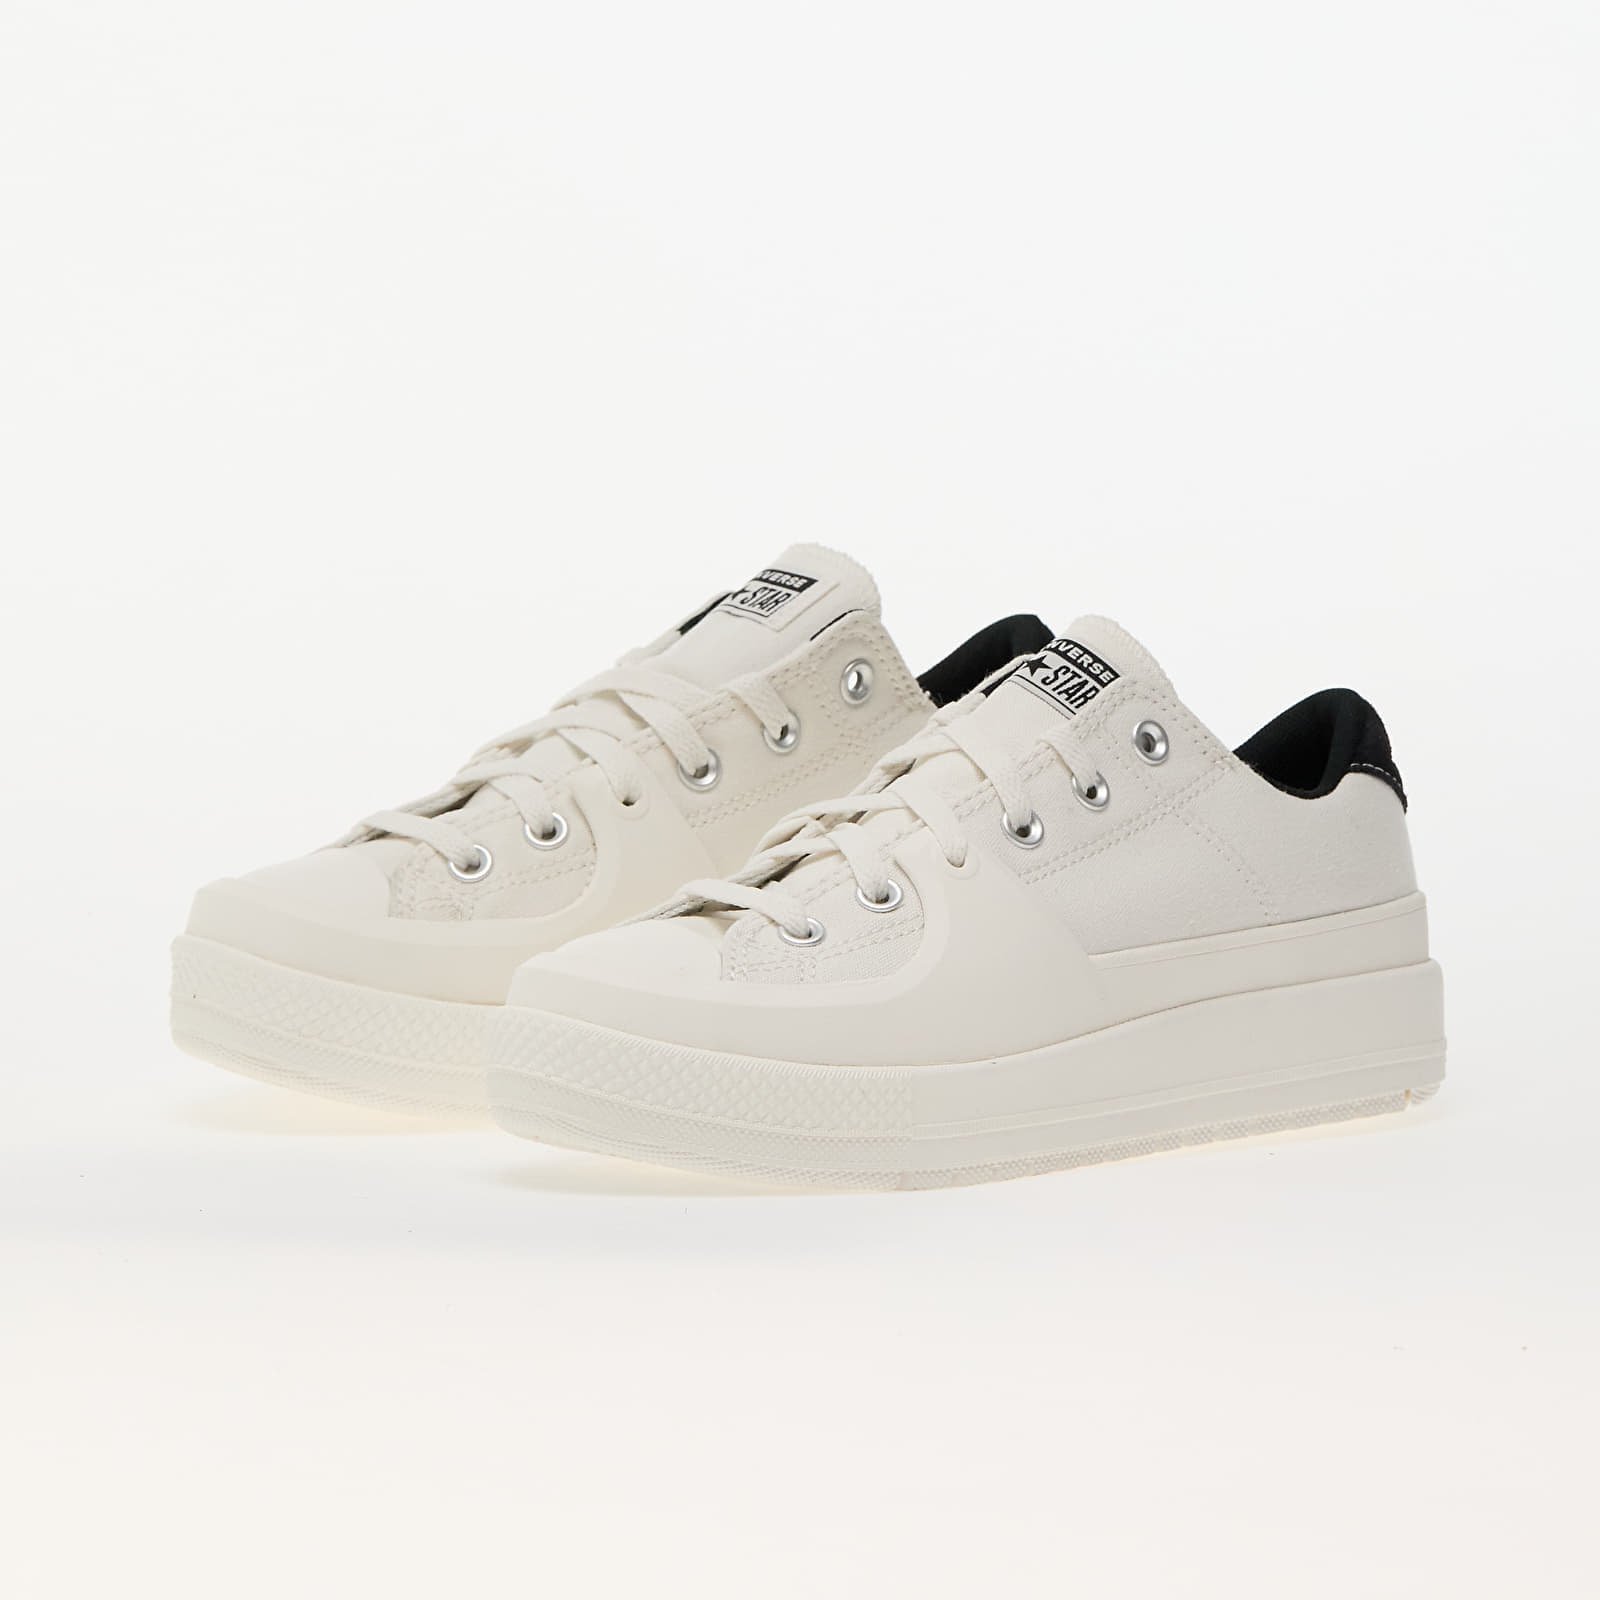 Chuck Taylor All Star Construct Vintage White/ Black